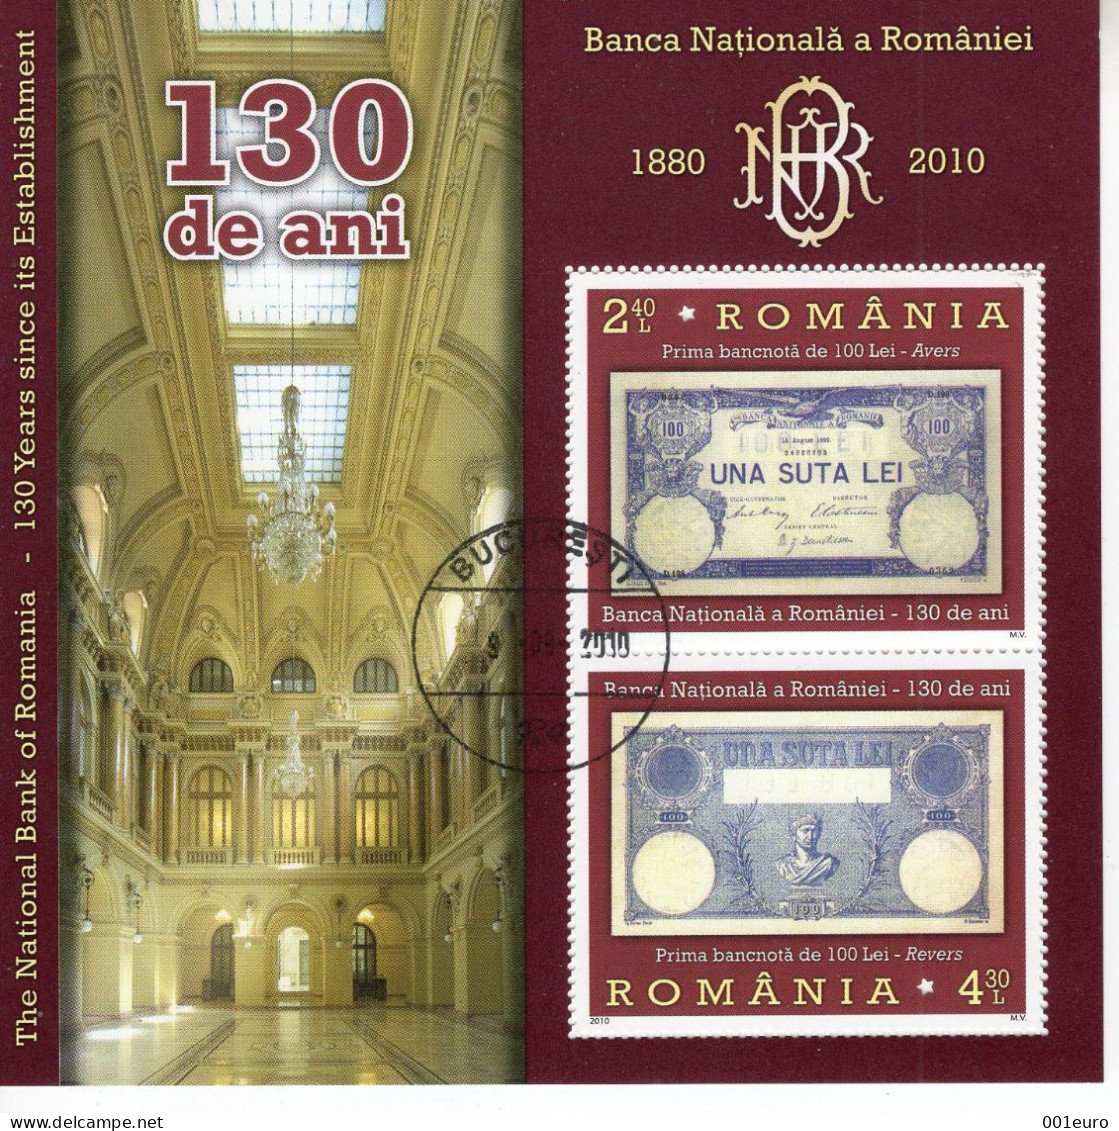 ROMANIA 2010 : ROMANIAN NATIONAL BANK130 YEARS - BANKNOTE, Used Souvenir Block - Registered Shipping! - Used Stamps